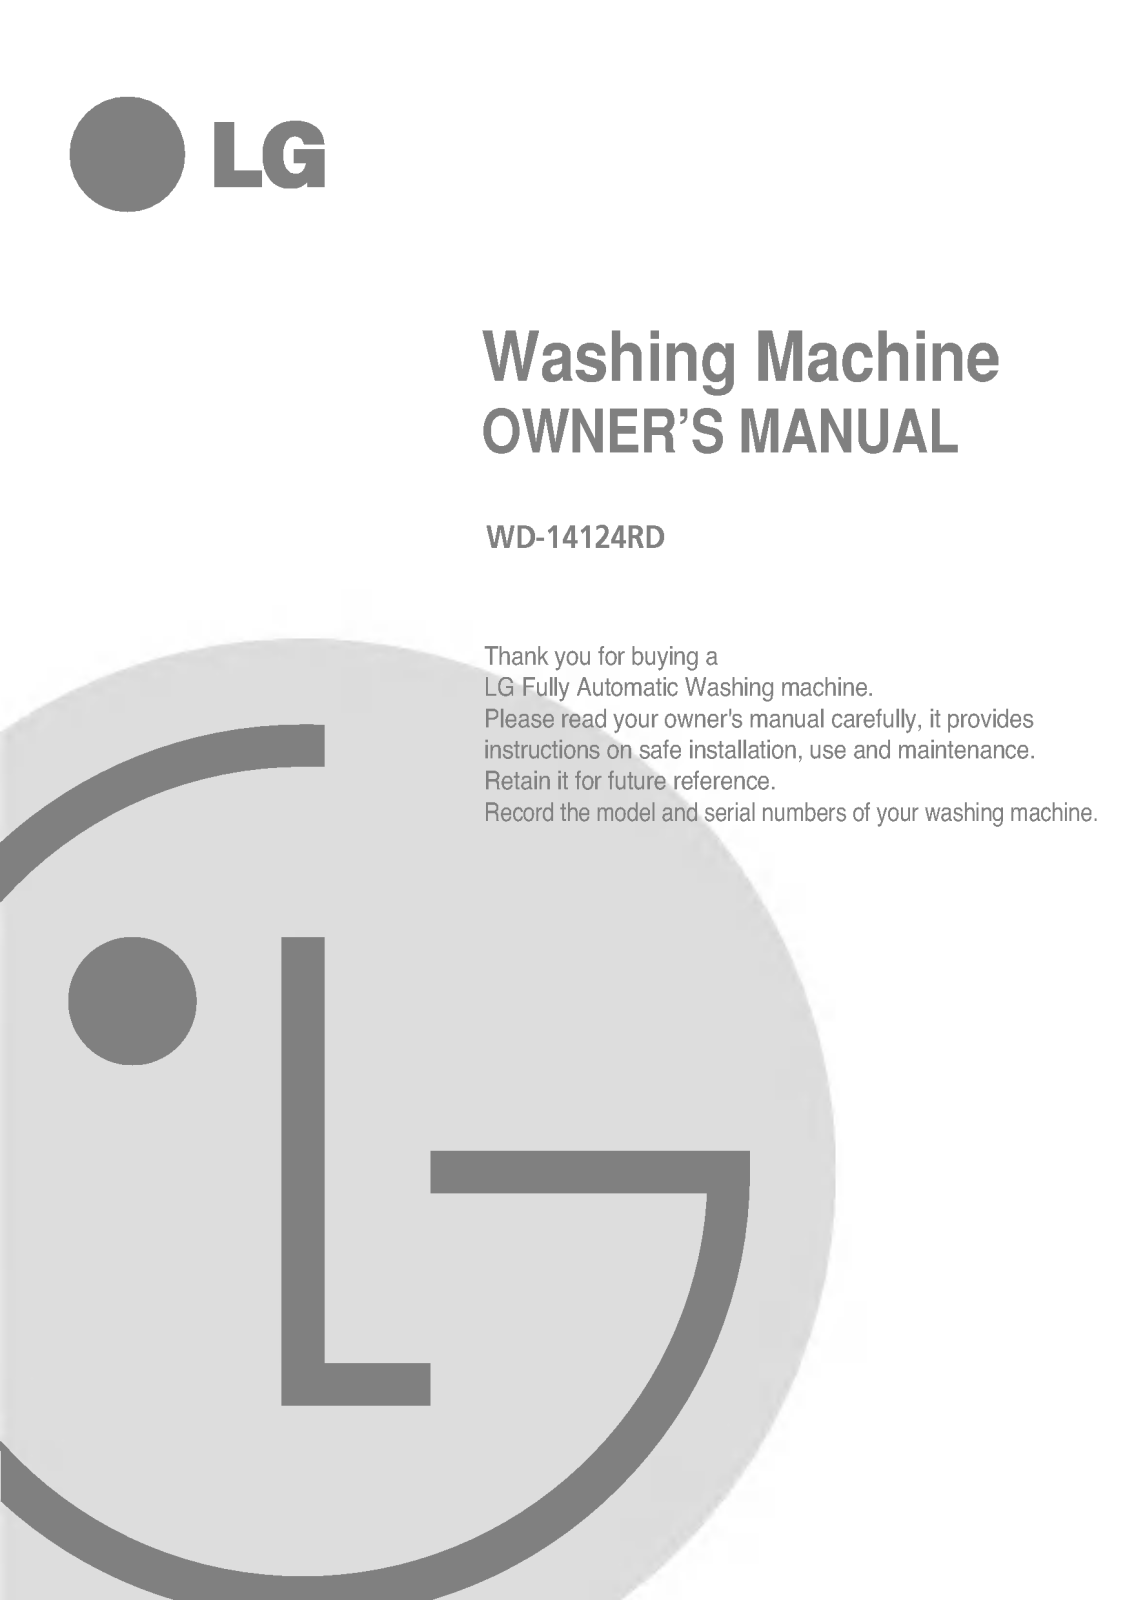 LG WD-14121RD Owner’s Manual